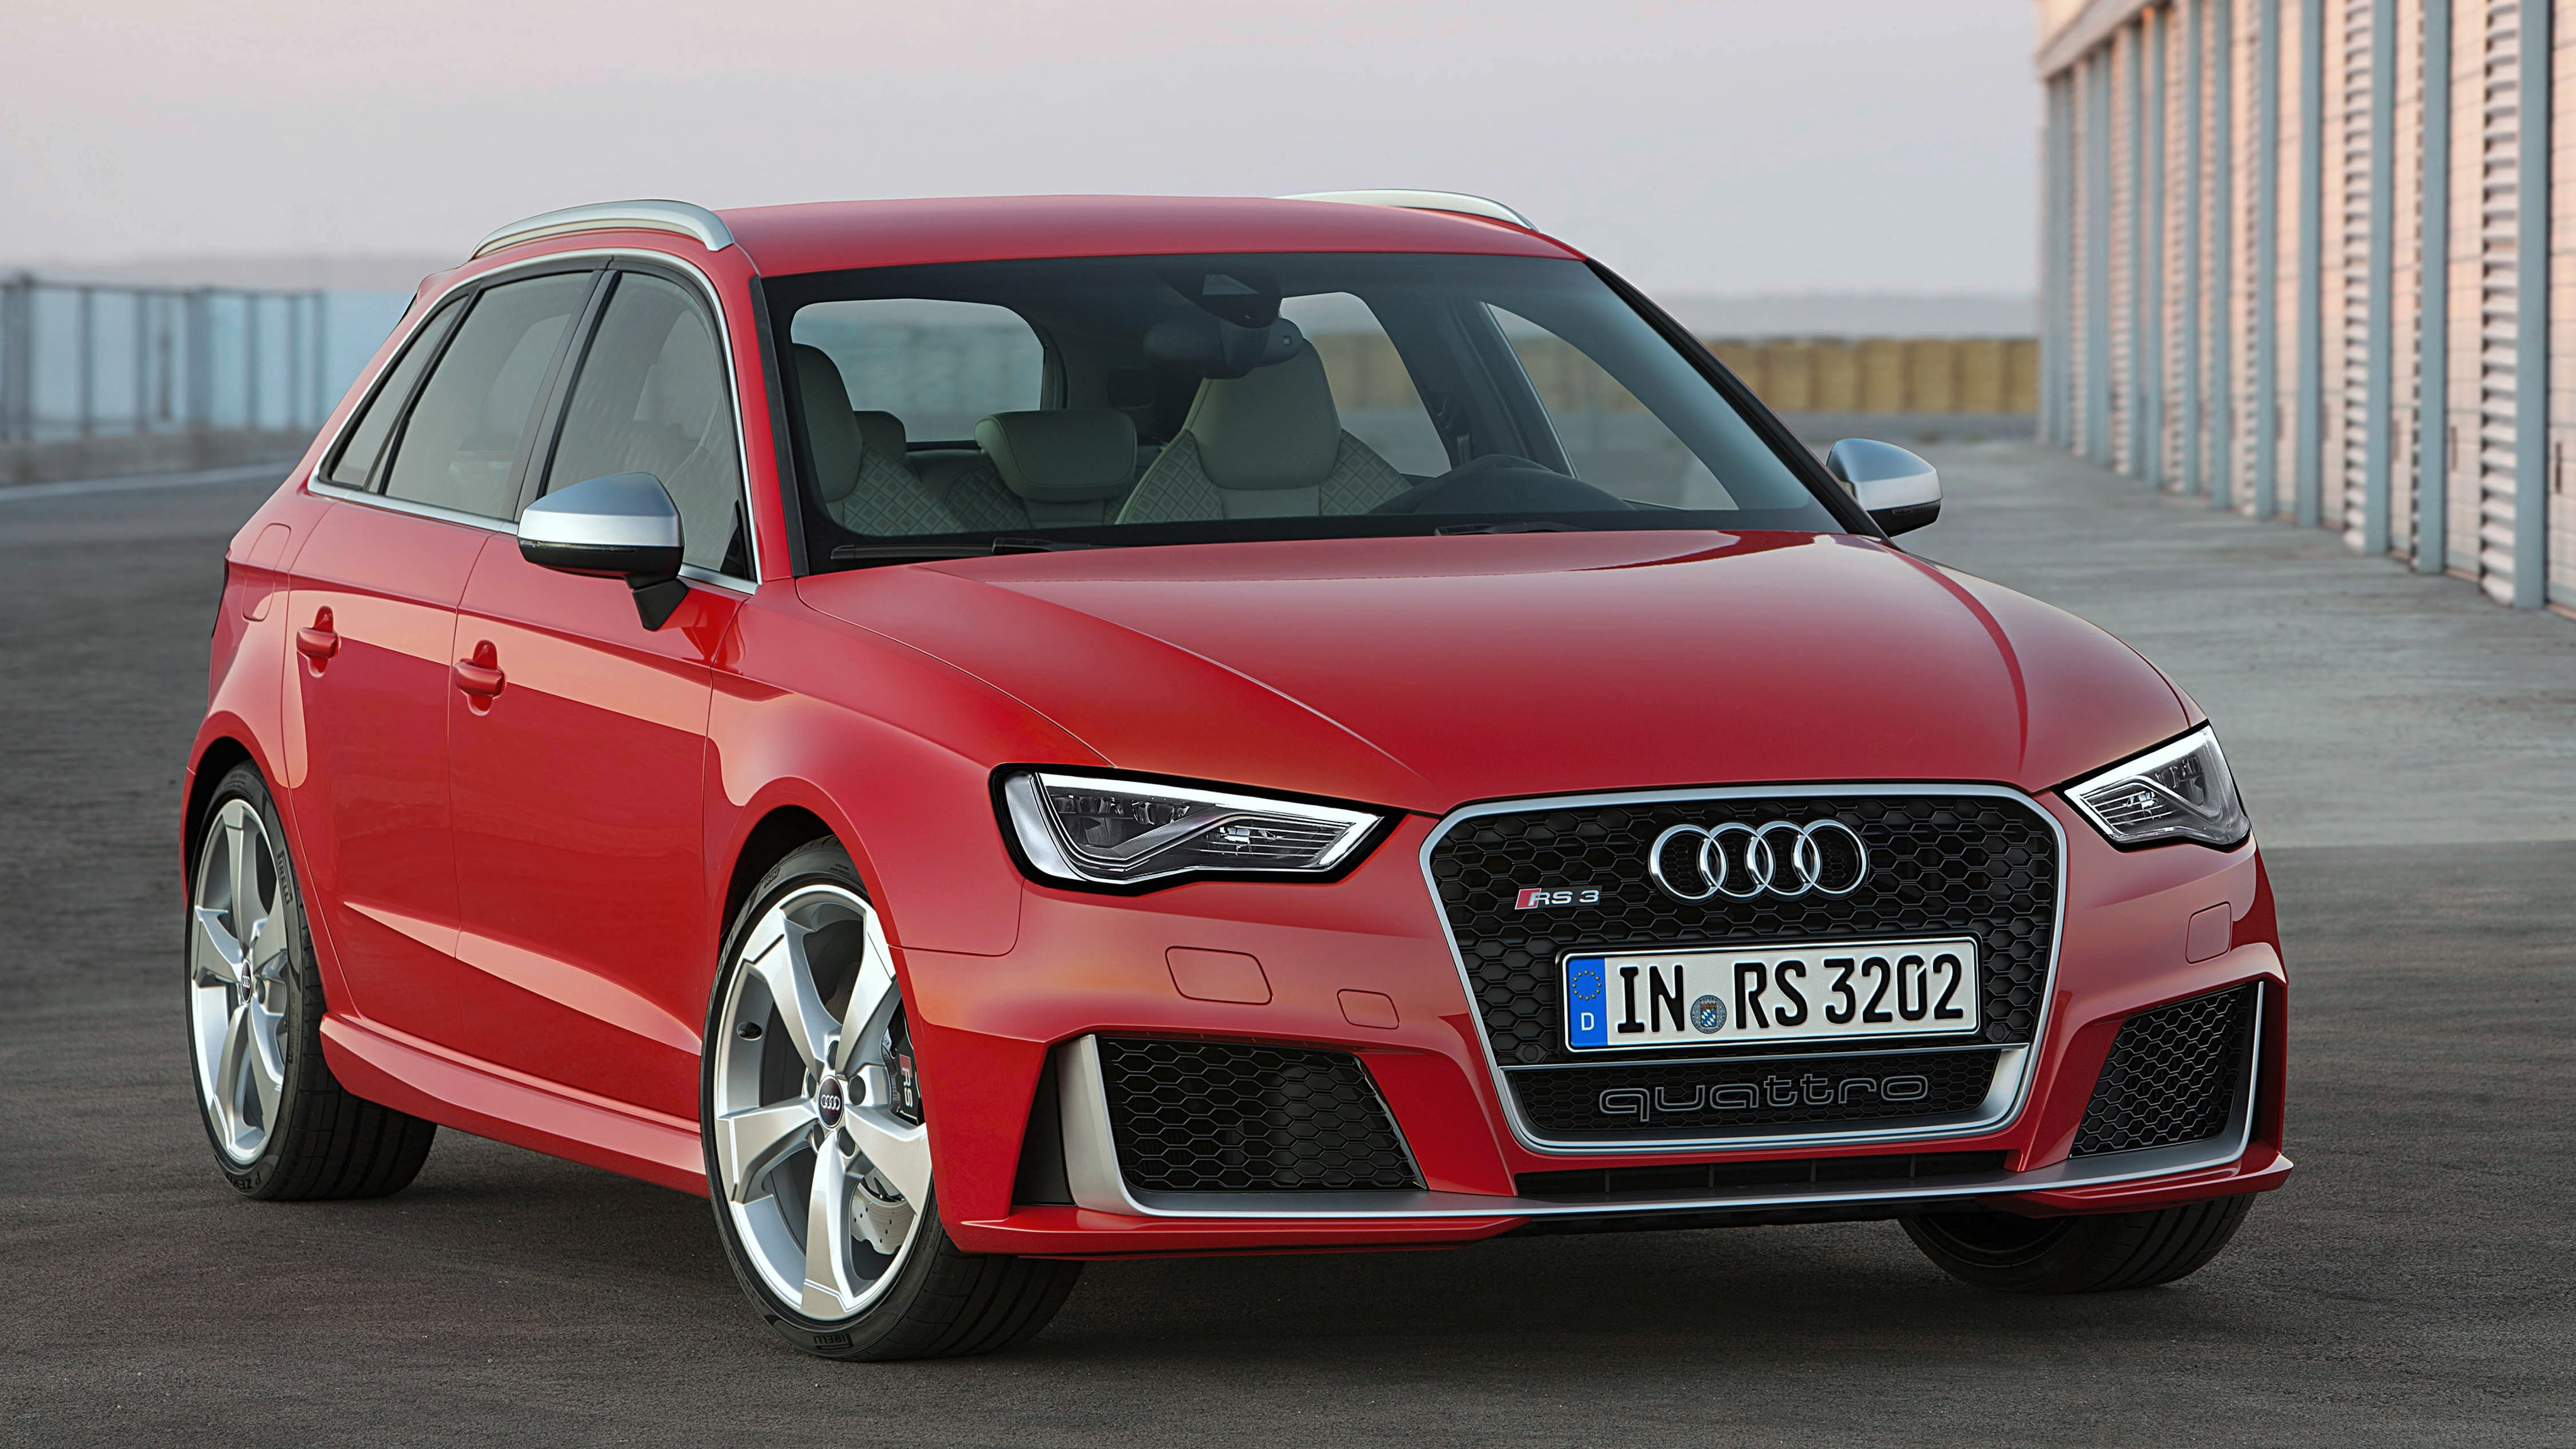 red Audi RS3 station wagon, Sportback, RS 3, mode of transportation